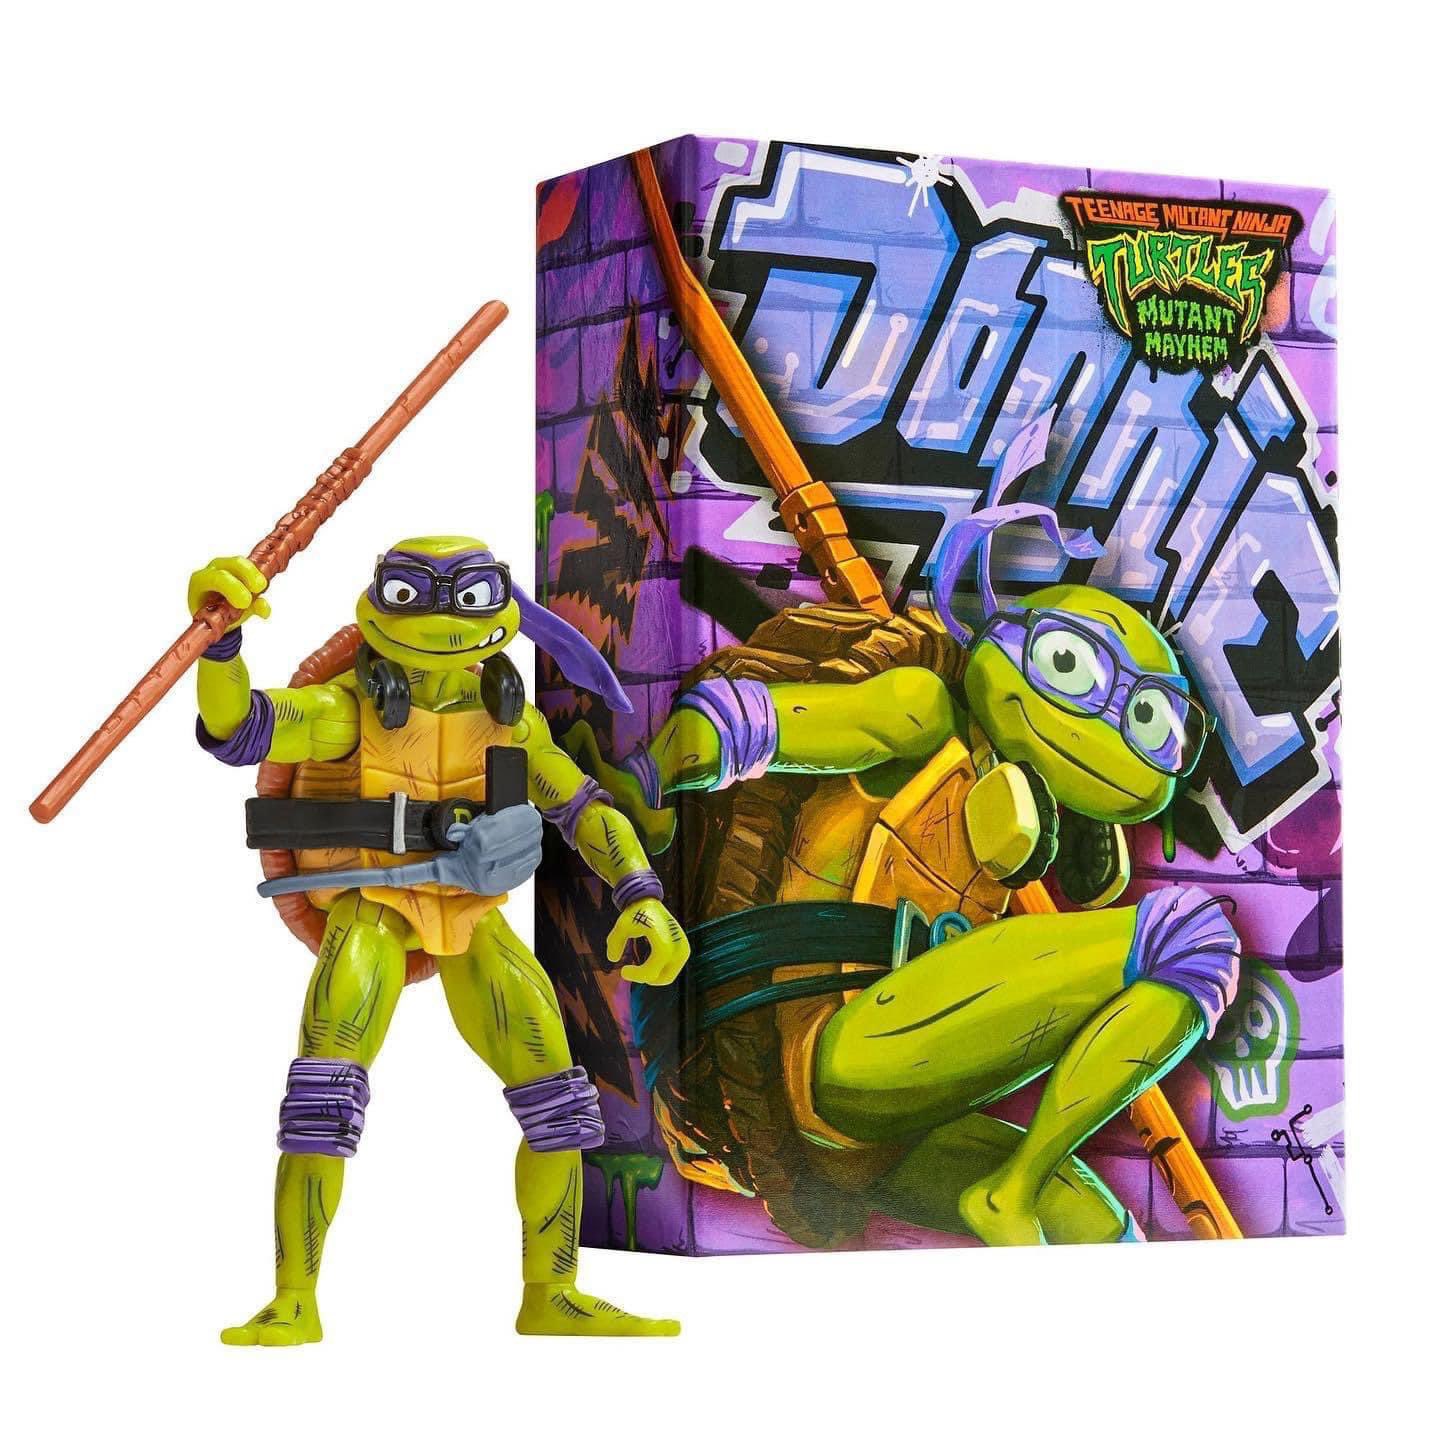 https://static.wikia.nocookie.net/tmnt/images/d/df/Mmsdccdon1.jpg/revision/latest?cb=20230731170625